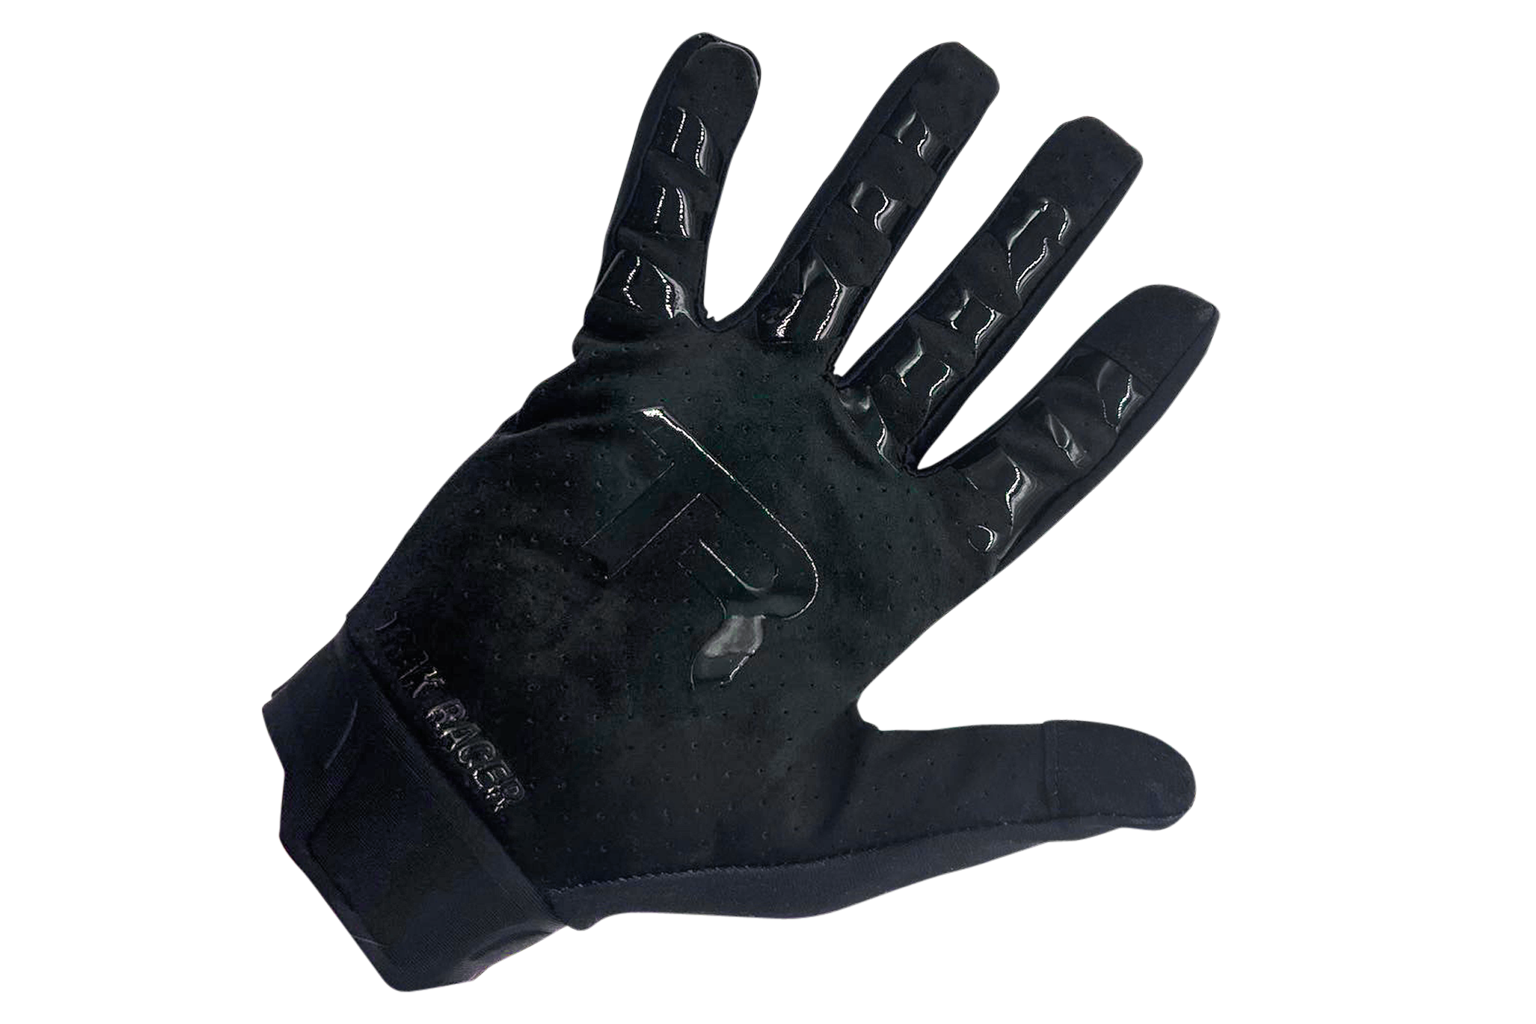 Trak Racer Multi-Use Sim Racing Gloves - Blacked Out